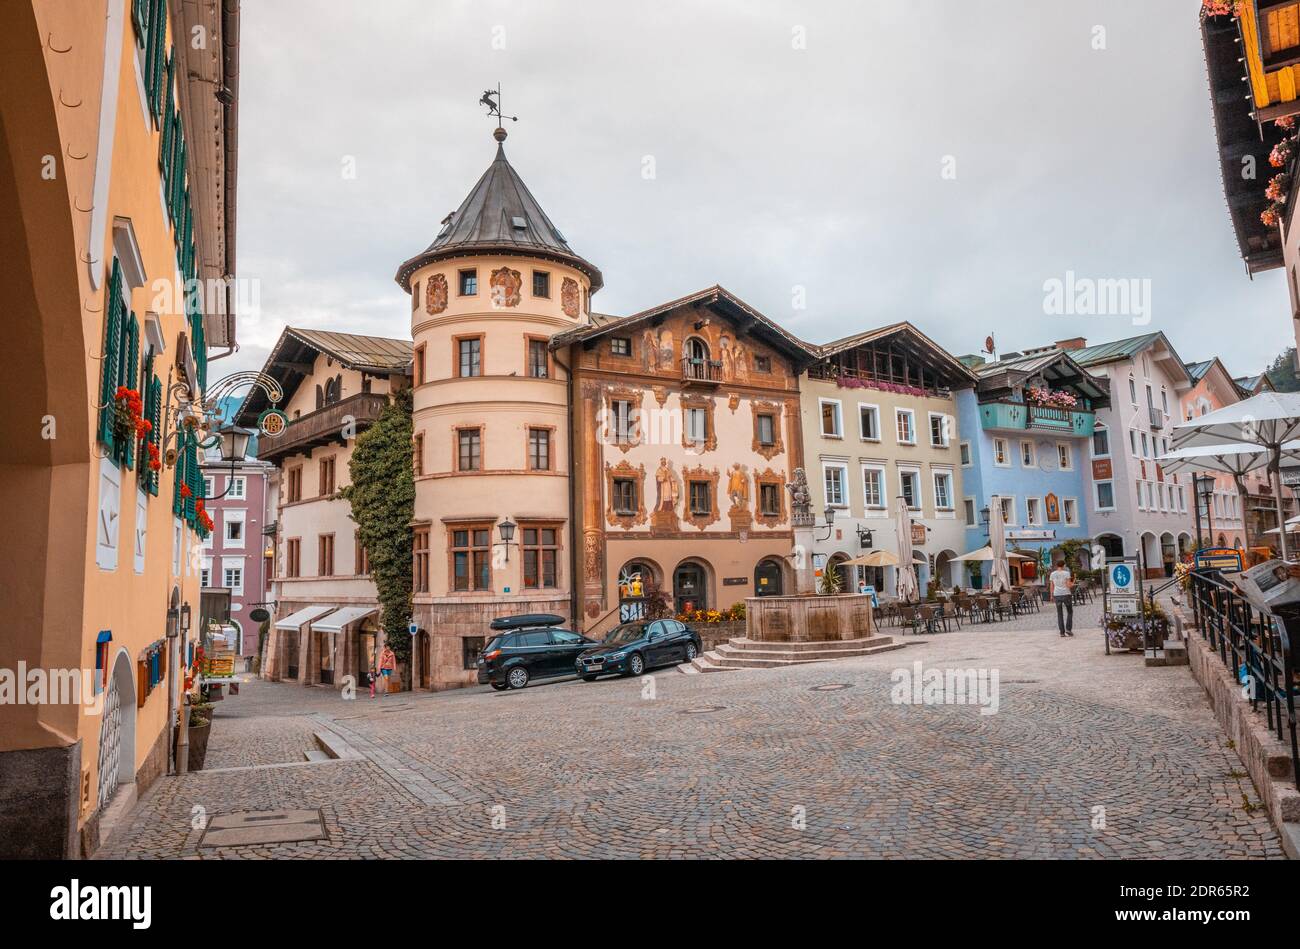 Old town square of Berchtesgaden Stock Photo